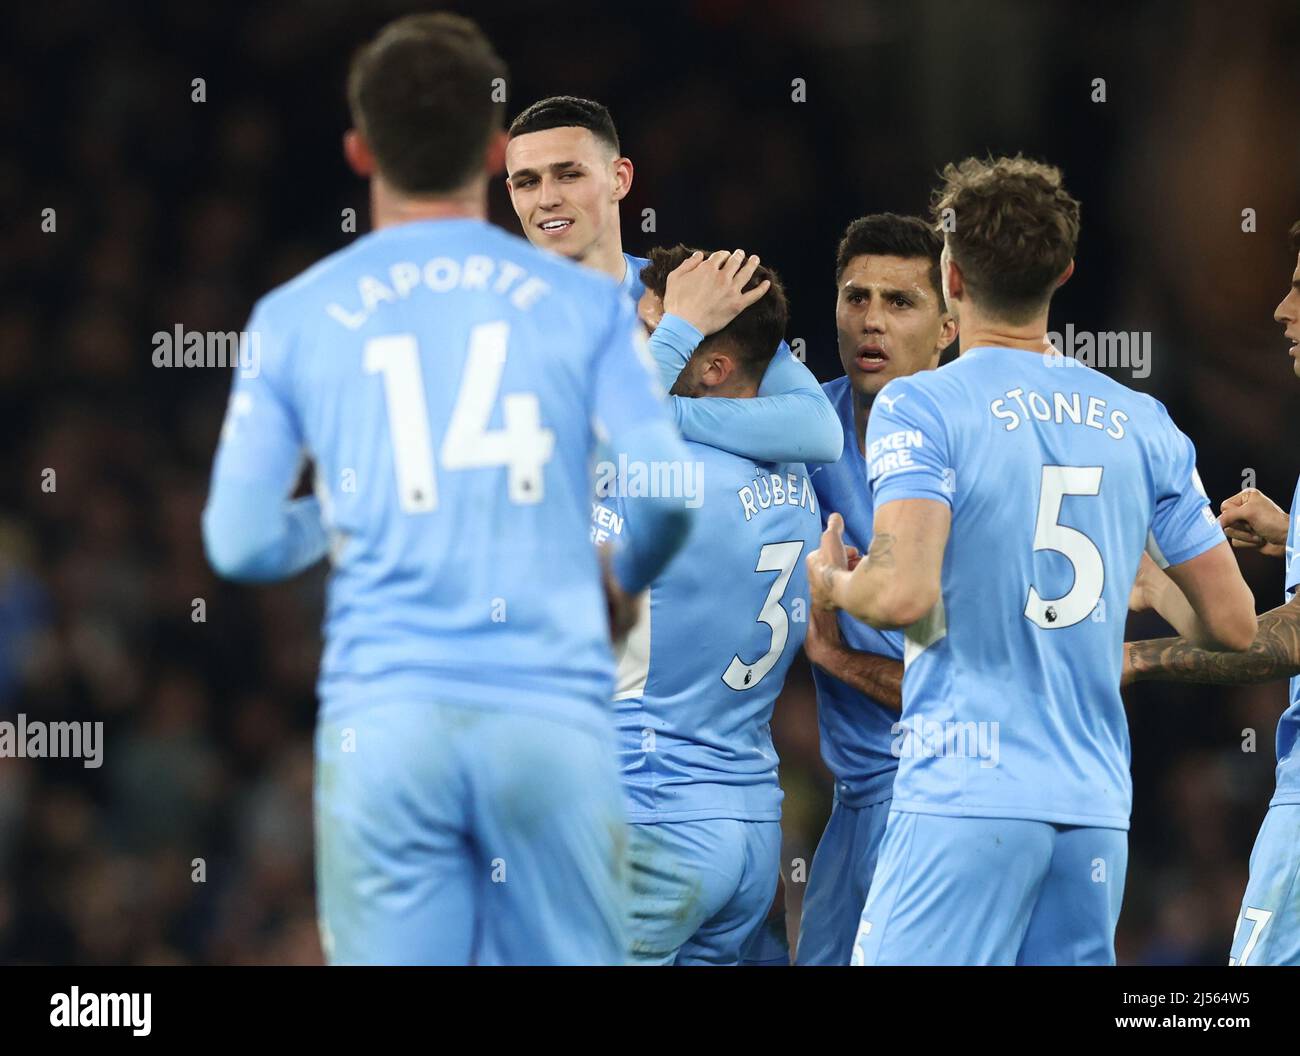 Manchester, England, 20th April 2022.   Phil Foden of Manchester City celebrates scoring their second goal during the Premier League match at the Etihad Stadium, Manchester. Picture credit should read: Darren Staples / Sportimage Stock Photo